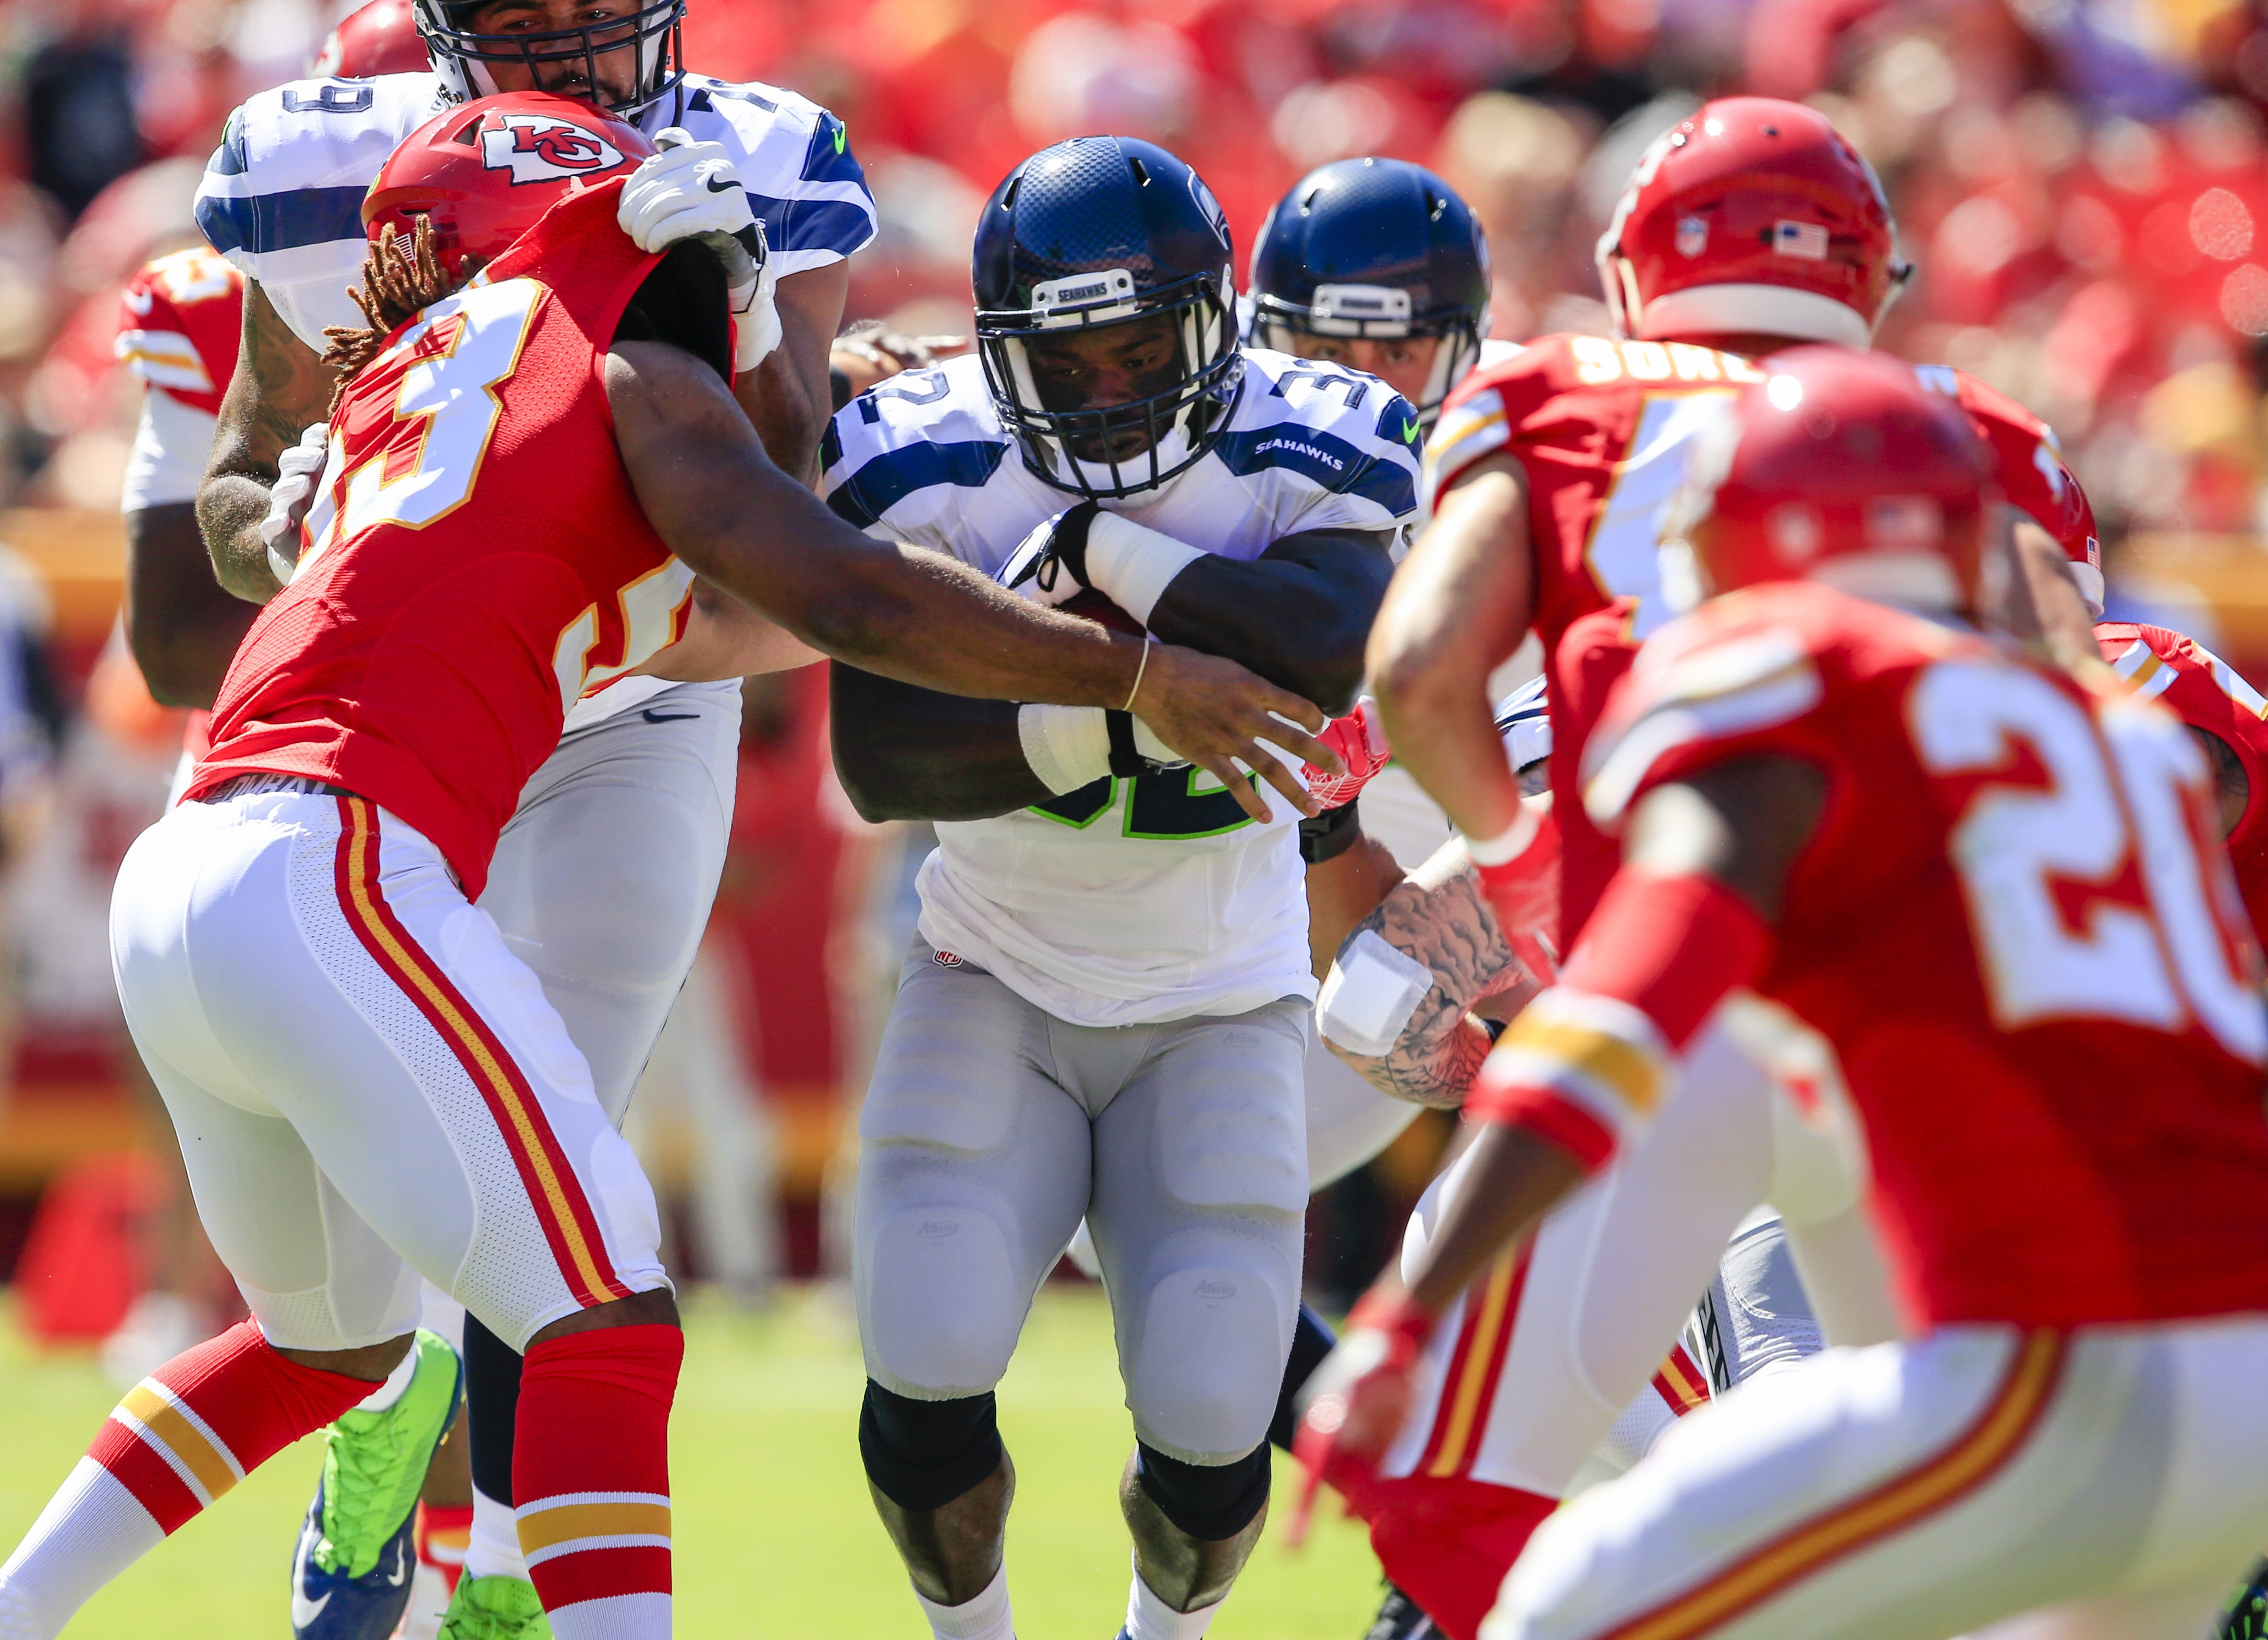 Kansas City Chiefs linebacker Ramik Wilson (53) tries to tackle Seattle Seahawks running back Christine Michael (32) during the first half of an NFL preseason football game in Kansas City, Mo., Saturday, Aug. 13, 2016.